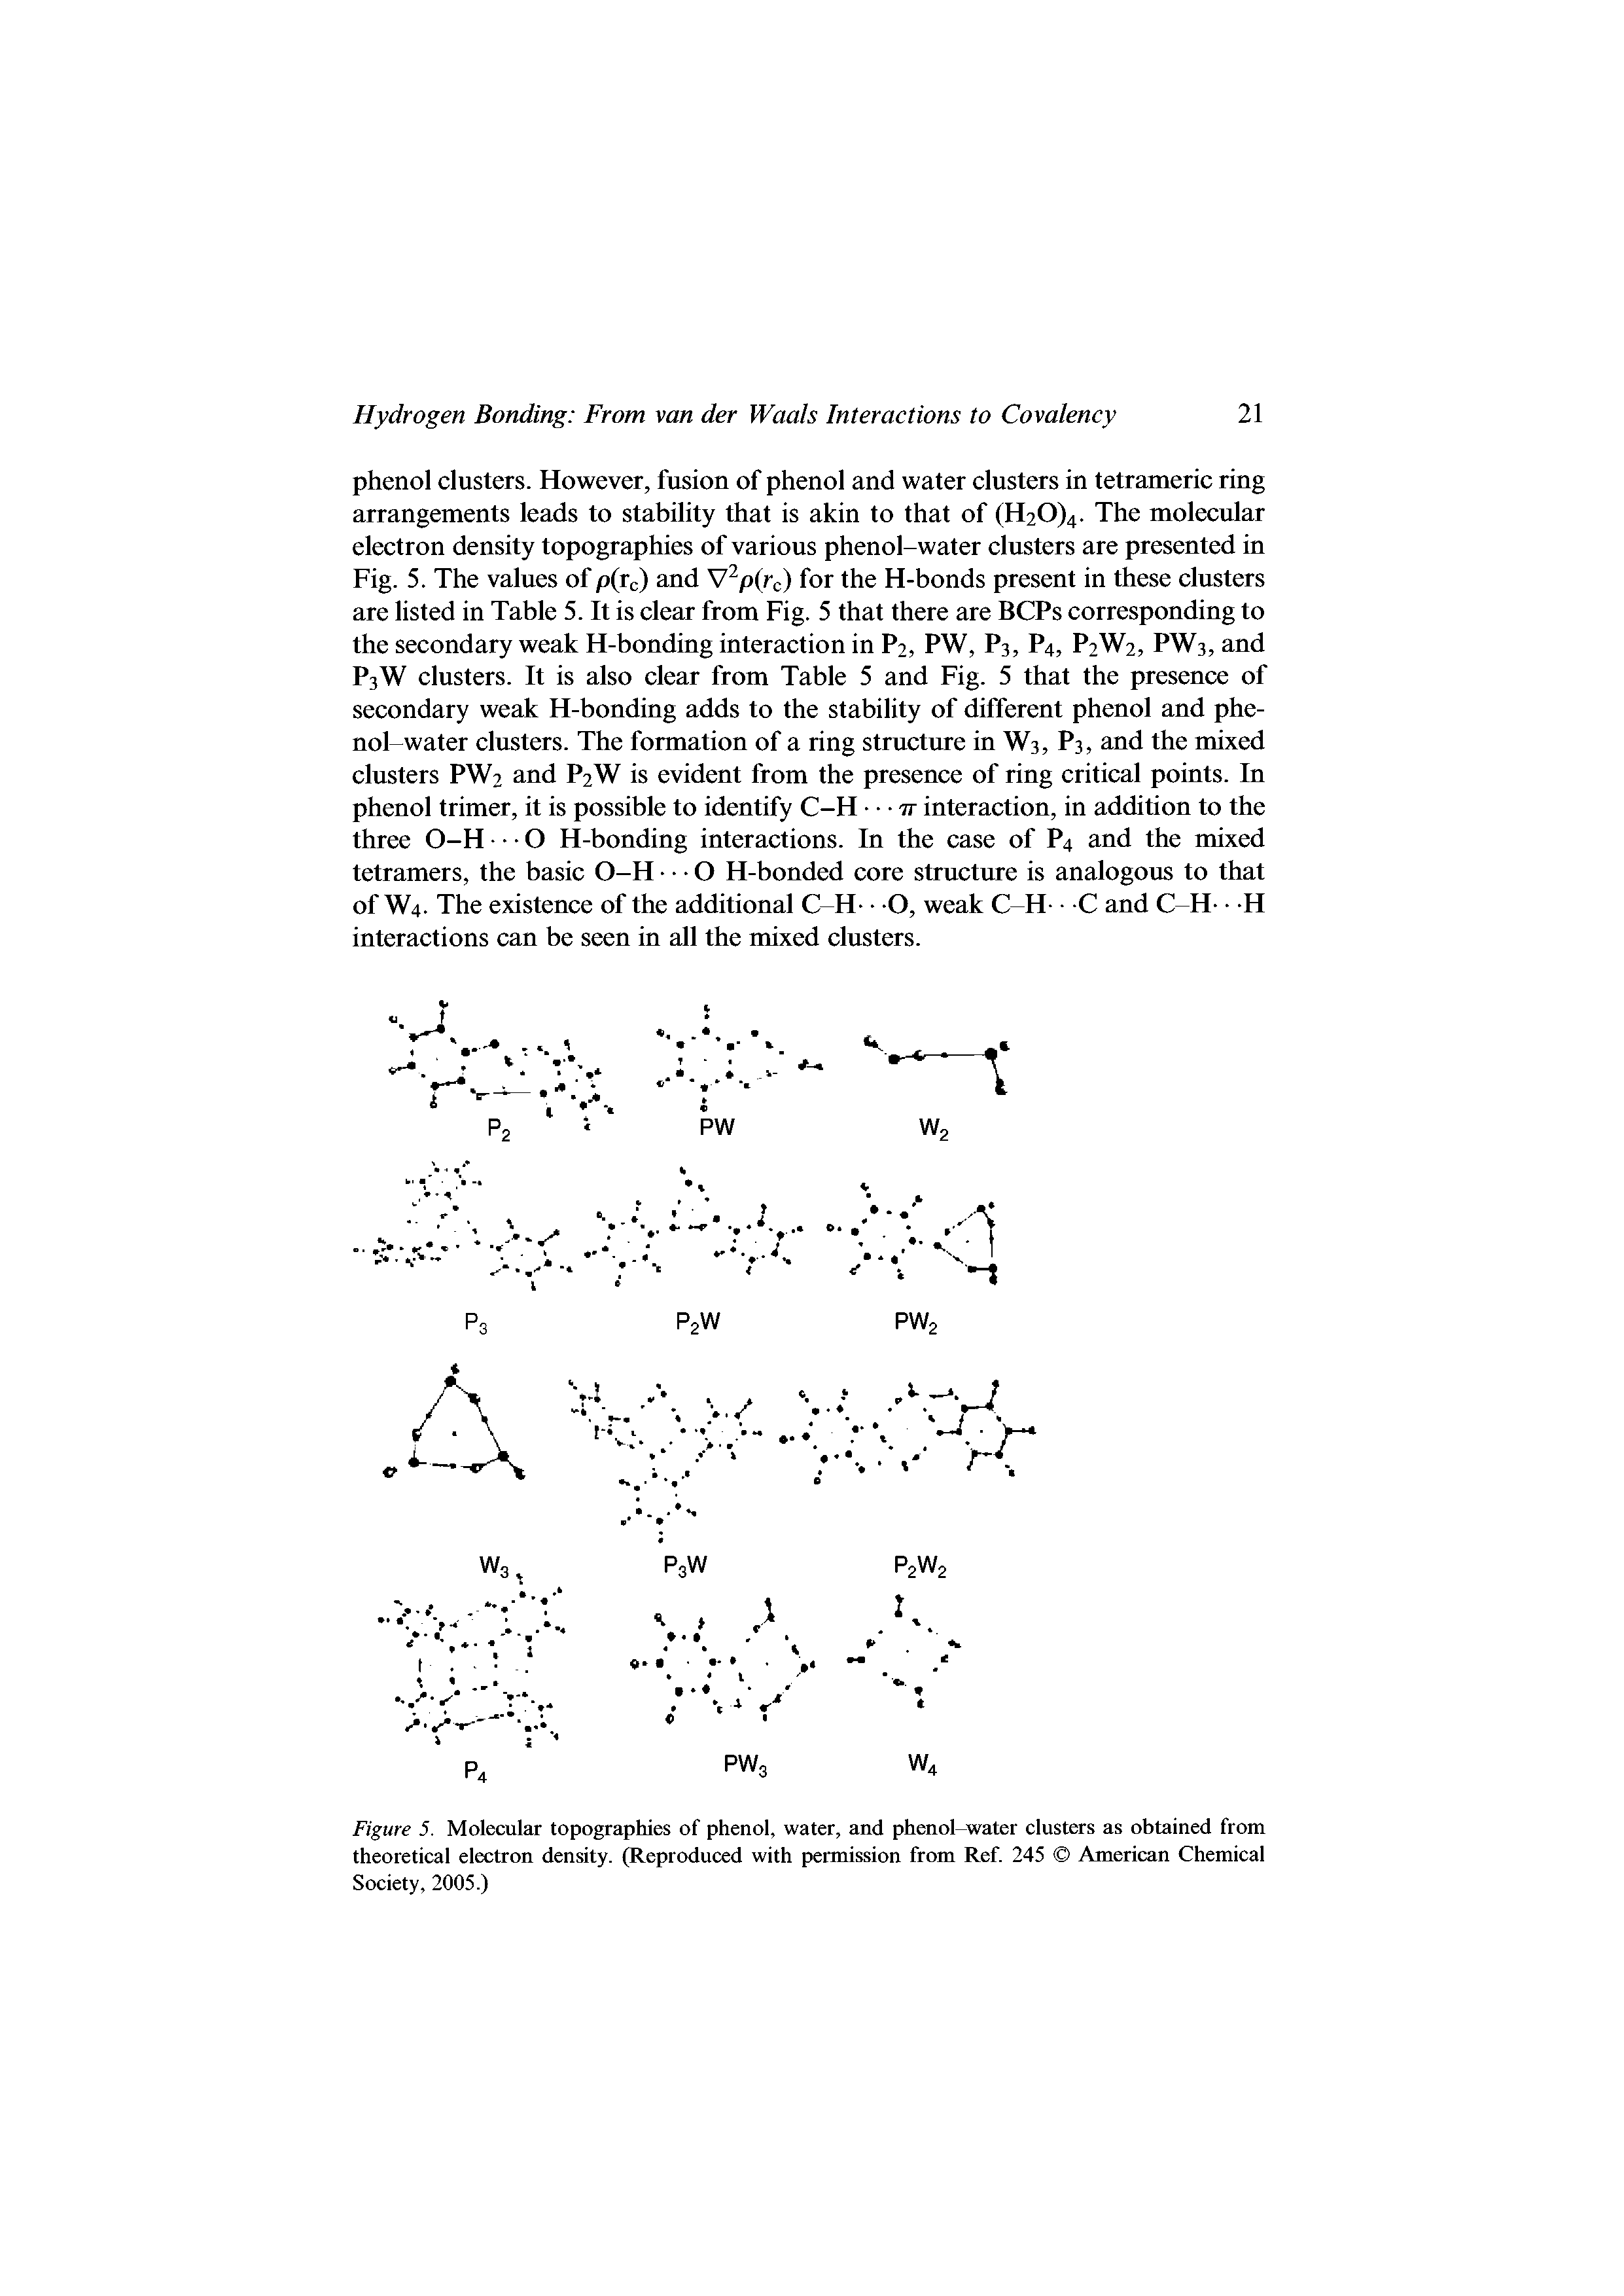 Figure 5. Molecular topographies of phenol, water, and phenol-water clusters as obtained from theoretical electron density. (Reproduced with permission from Ref. 245 American Chemical Society, 2005.)...